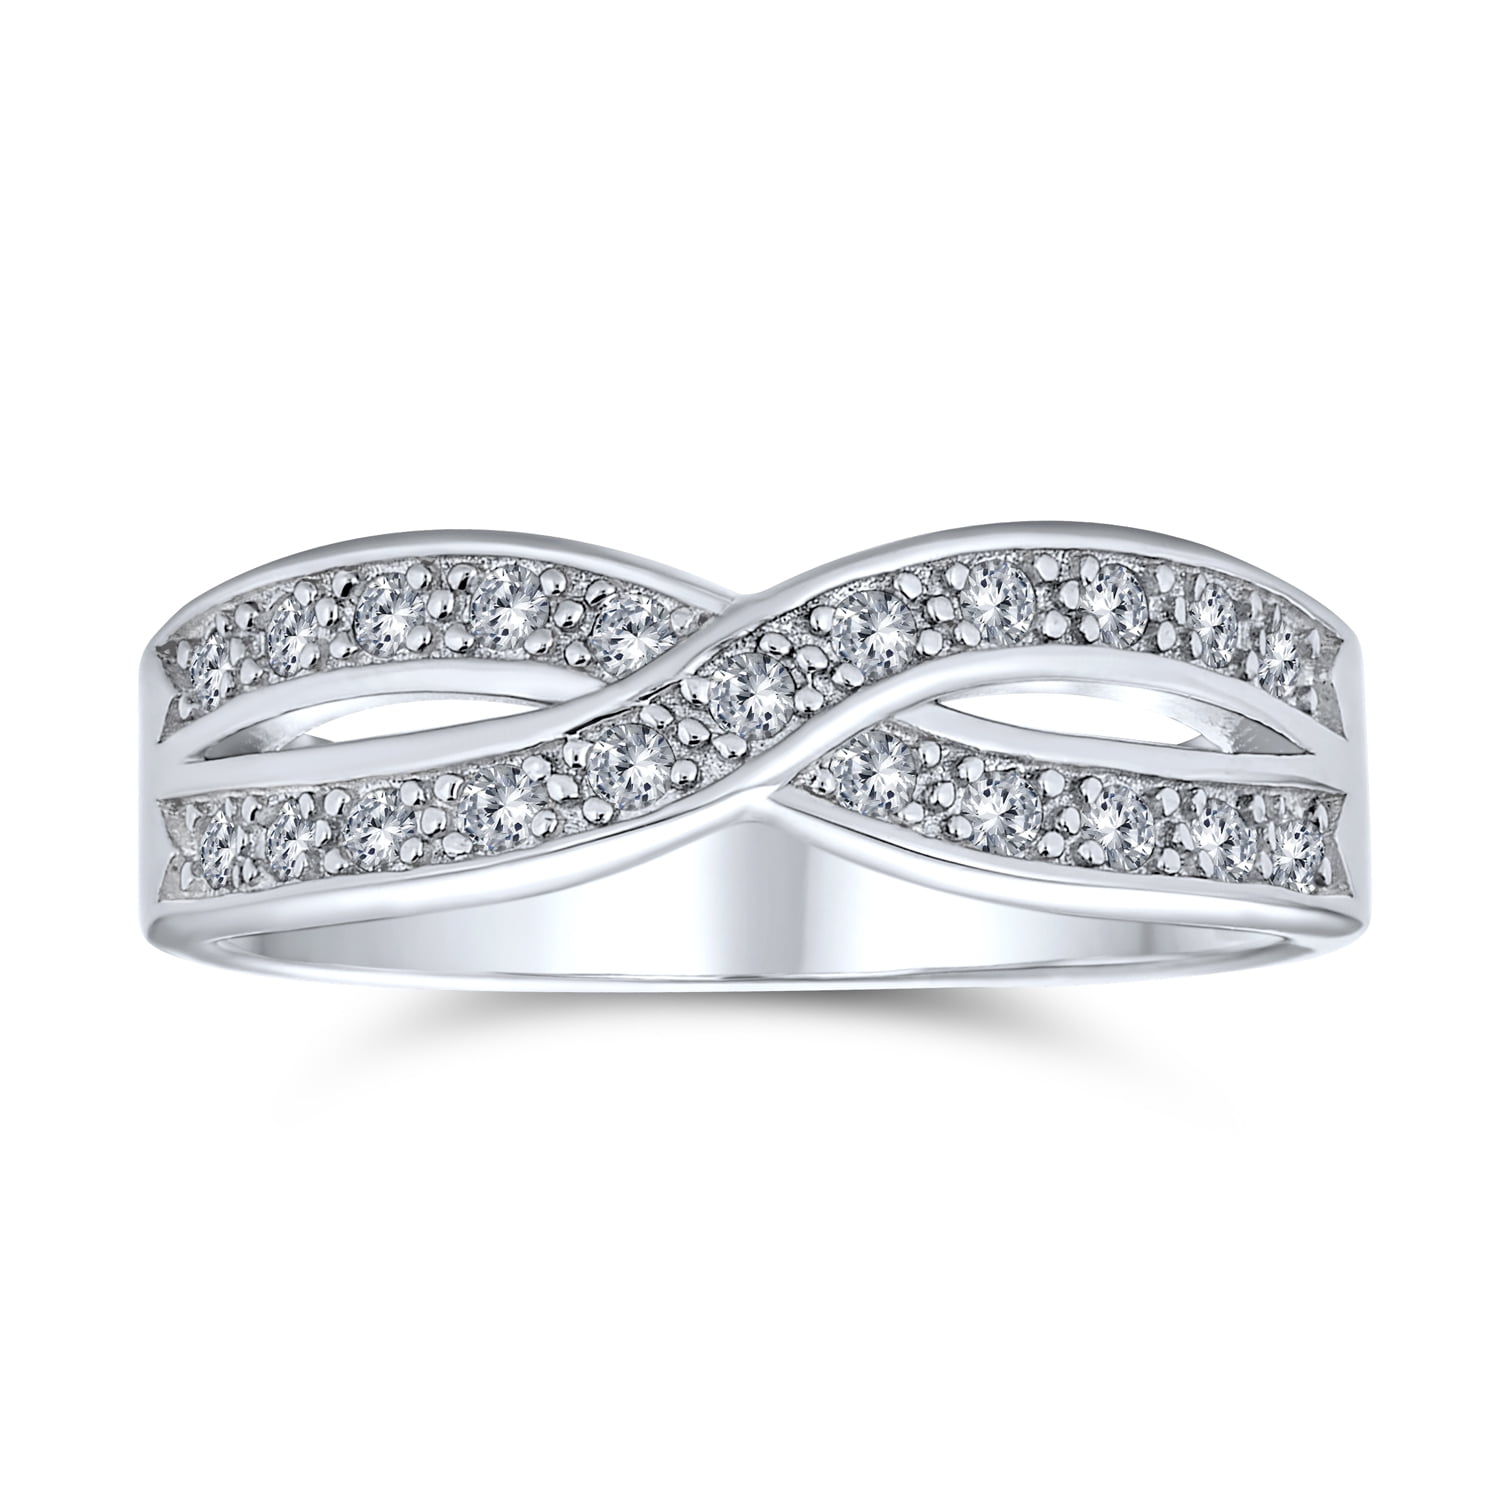 Two Tone Cz infinity cris cross Engagement Promise .925 Sterling Silver Ring 